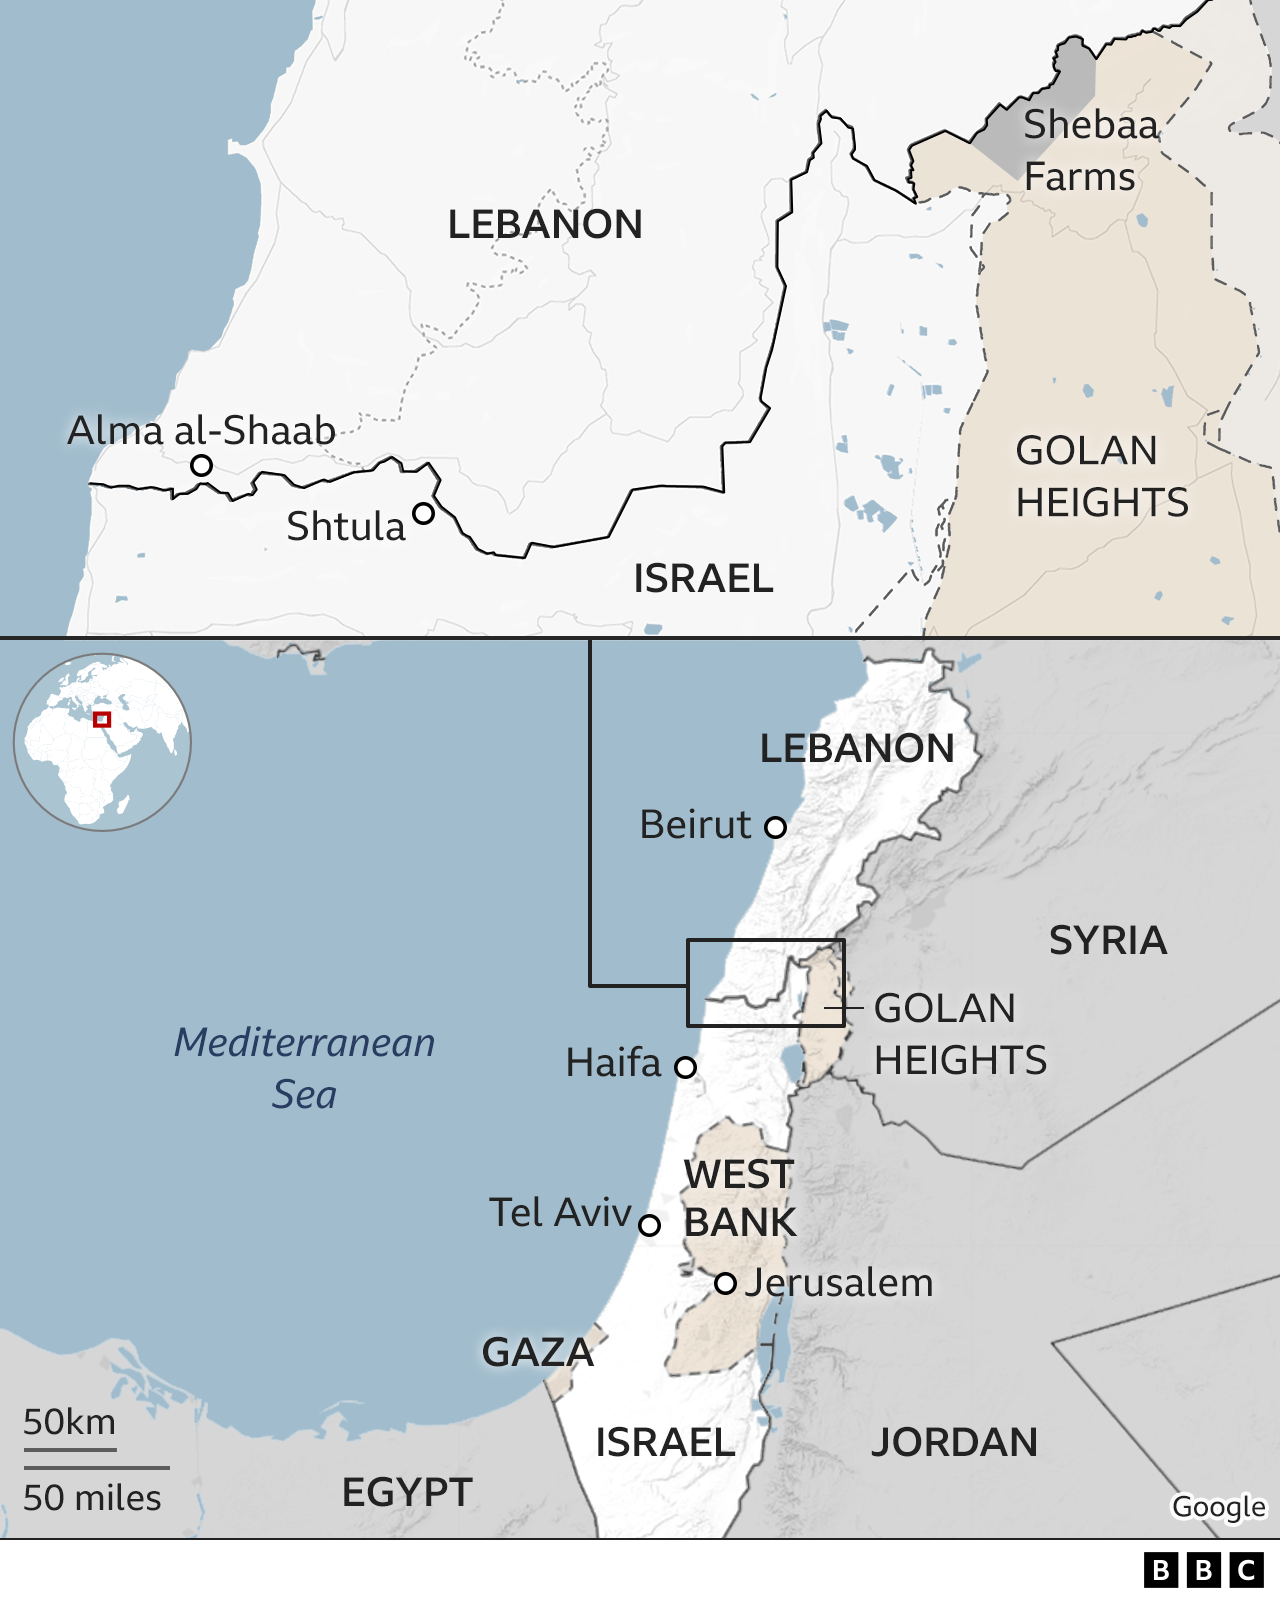 Map showing Israel, Lebanon and the Golan Heights